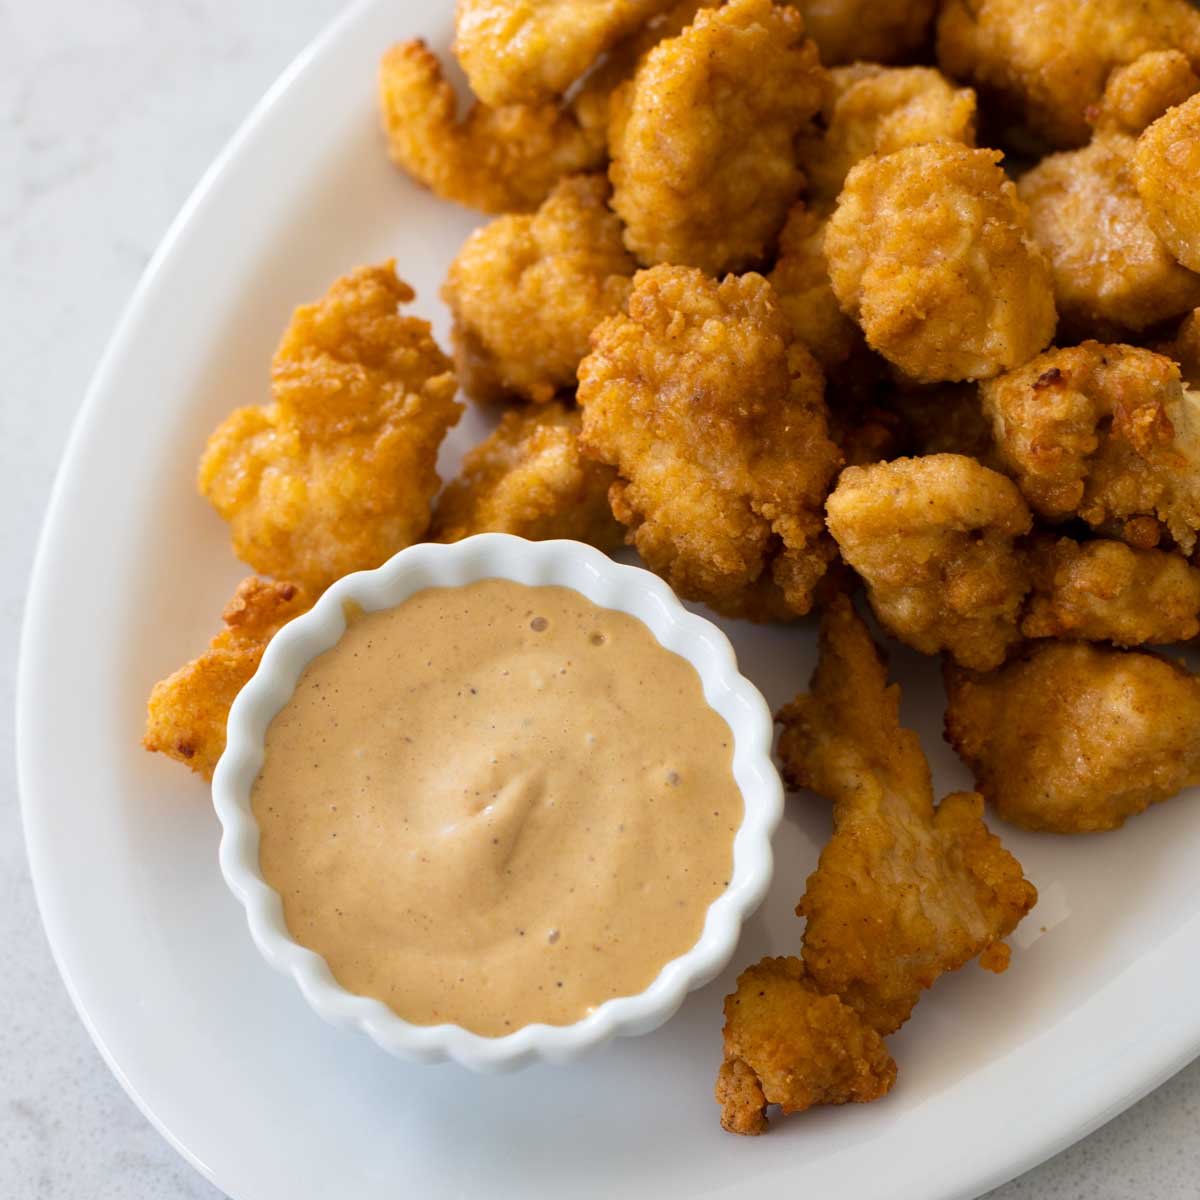 A platter of chicken nuggets has a cup of copycat Chick-Fil-A sauce for dunking.